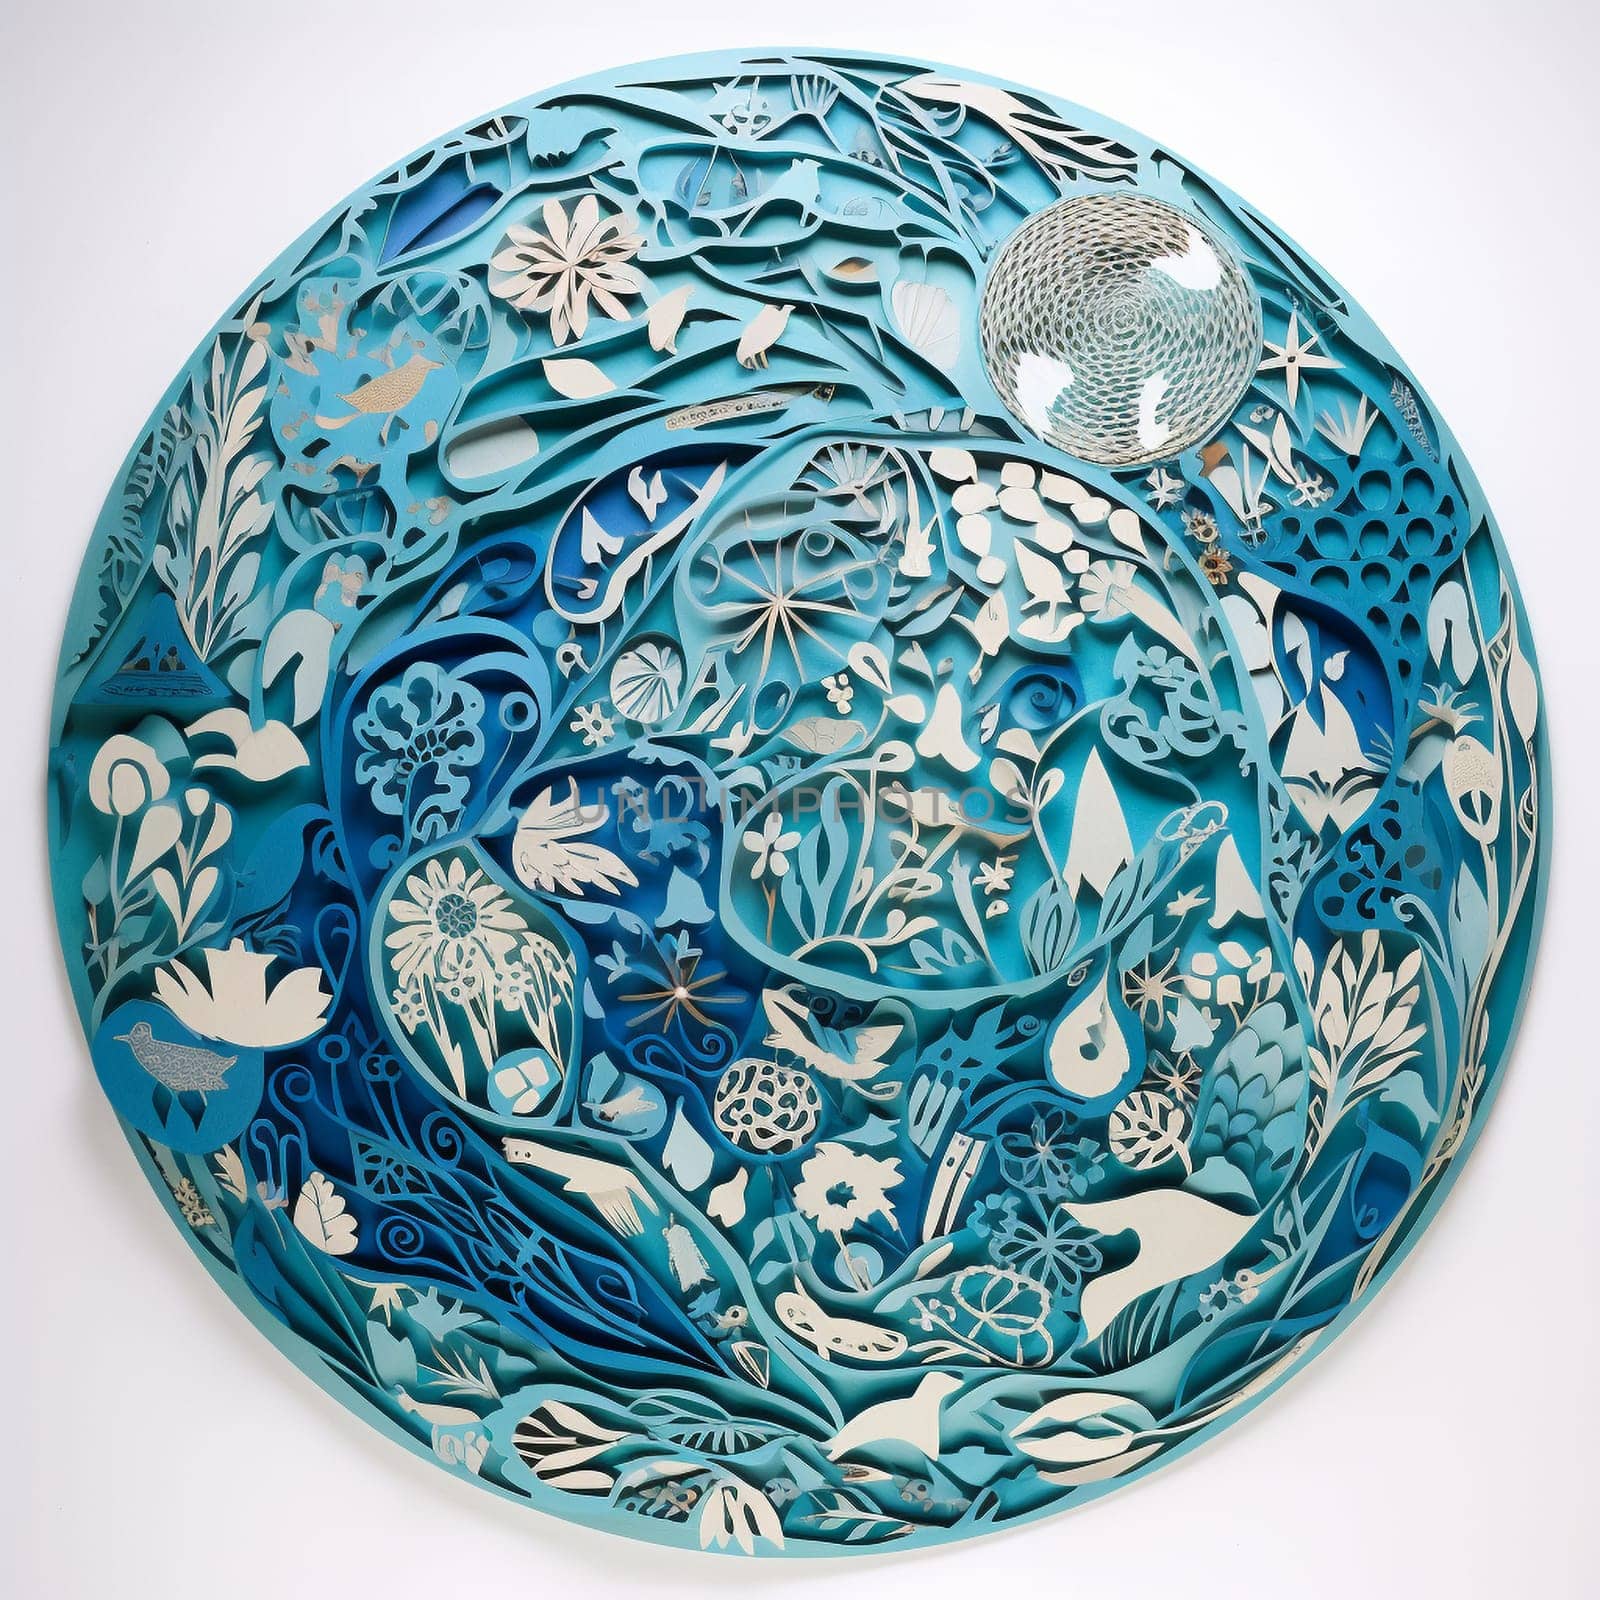 This image features a paper cutout of a globe rendered in shades of blue and green, surrounded by a variety of other environmental cutouts arranged in a flowing, organic pattern. The overall effect is visually striking and informative, highlighting the importance of protecting our planet and its resources.